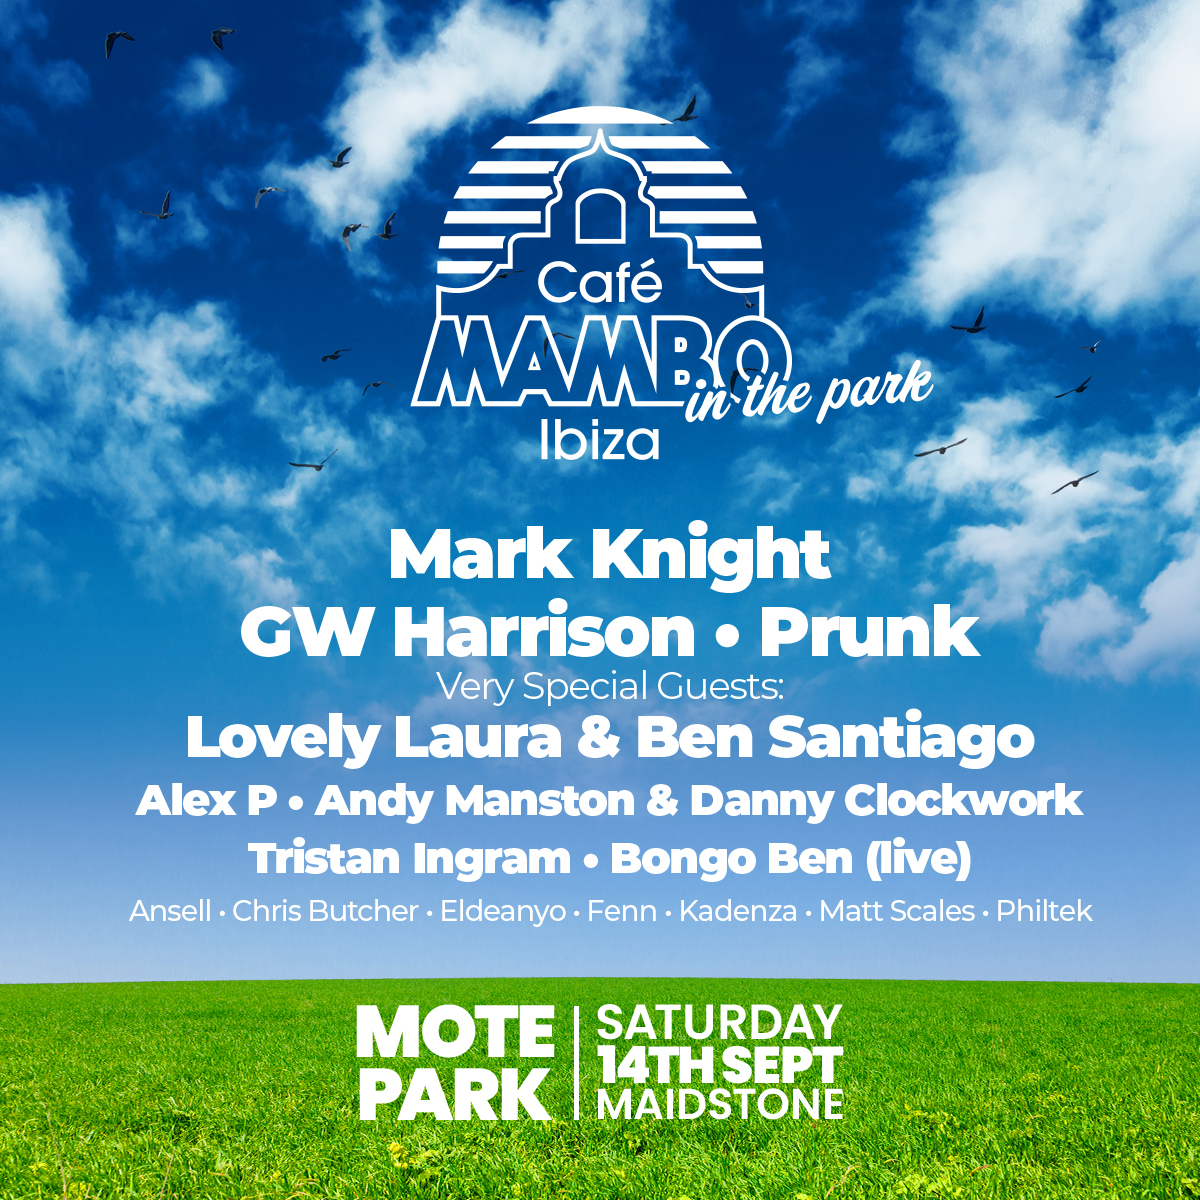 Mambo In The Park Maidstone! 🎪 We celebrate 30 years of Cafe Mambo Ibiza! General release & VIP tickets are available >> bit.ly/MamboInThePark… ⭐️